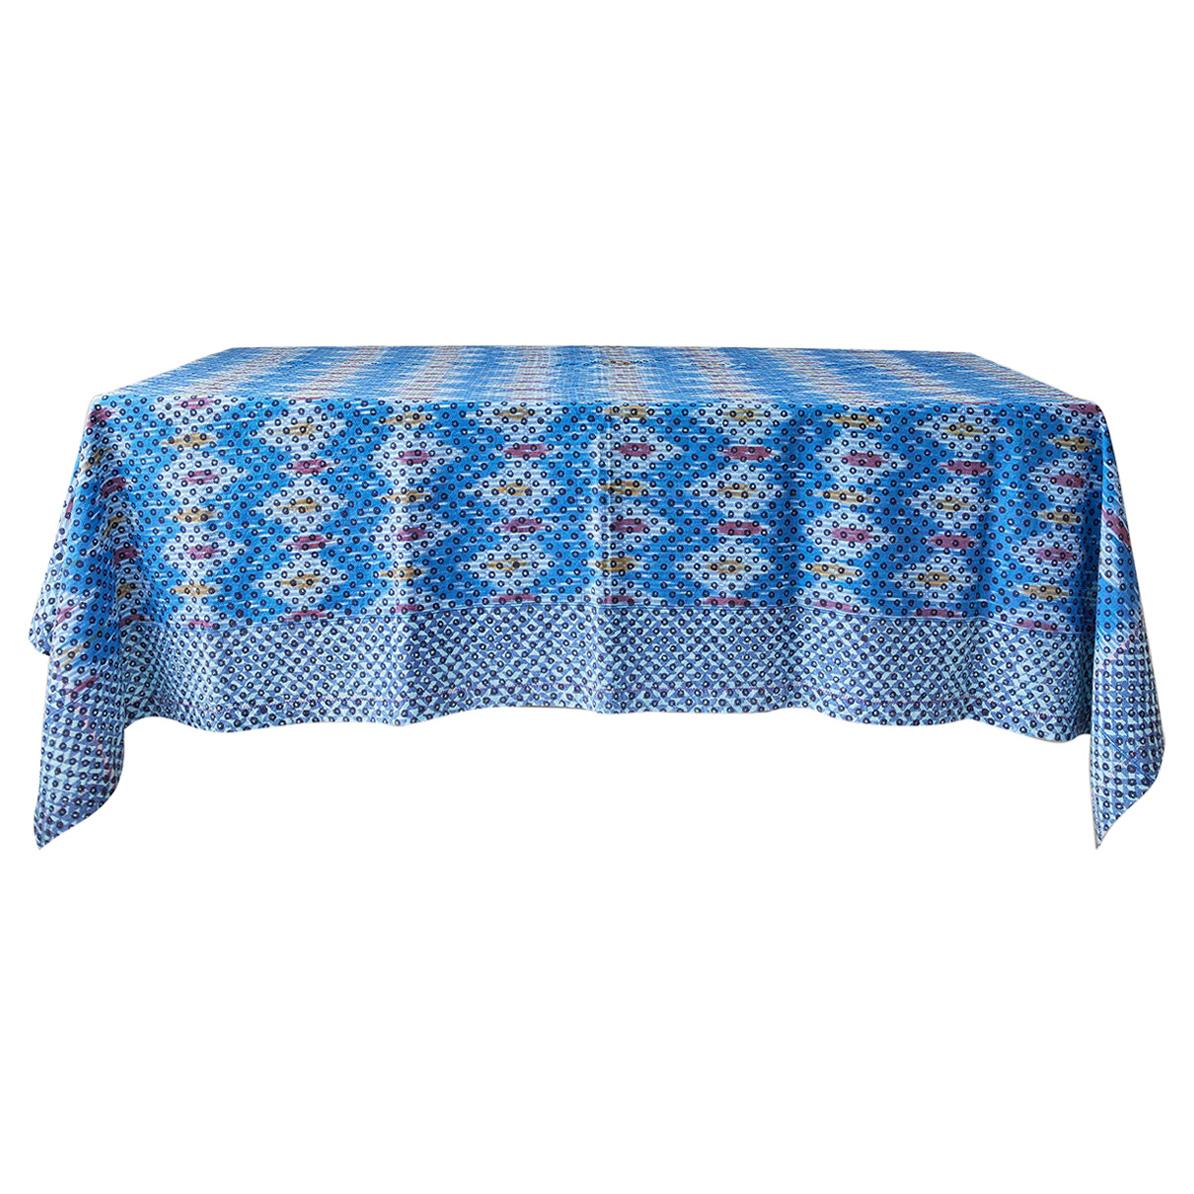 Contemporary Gregory Parkinson Tablecloth with Blue Ikat Hand-Blocked Patterns